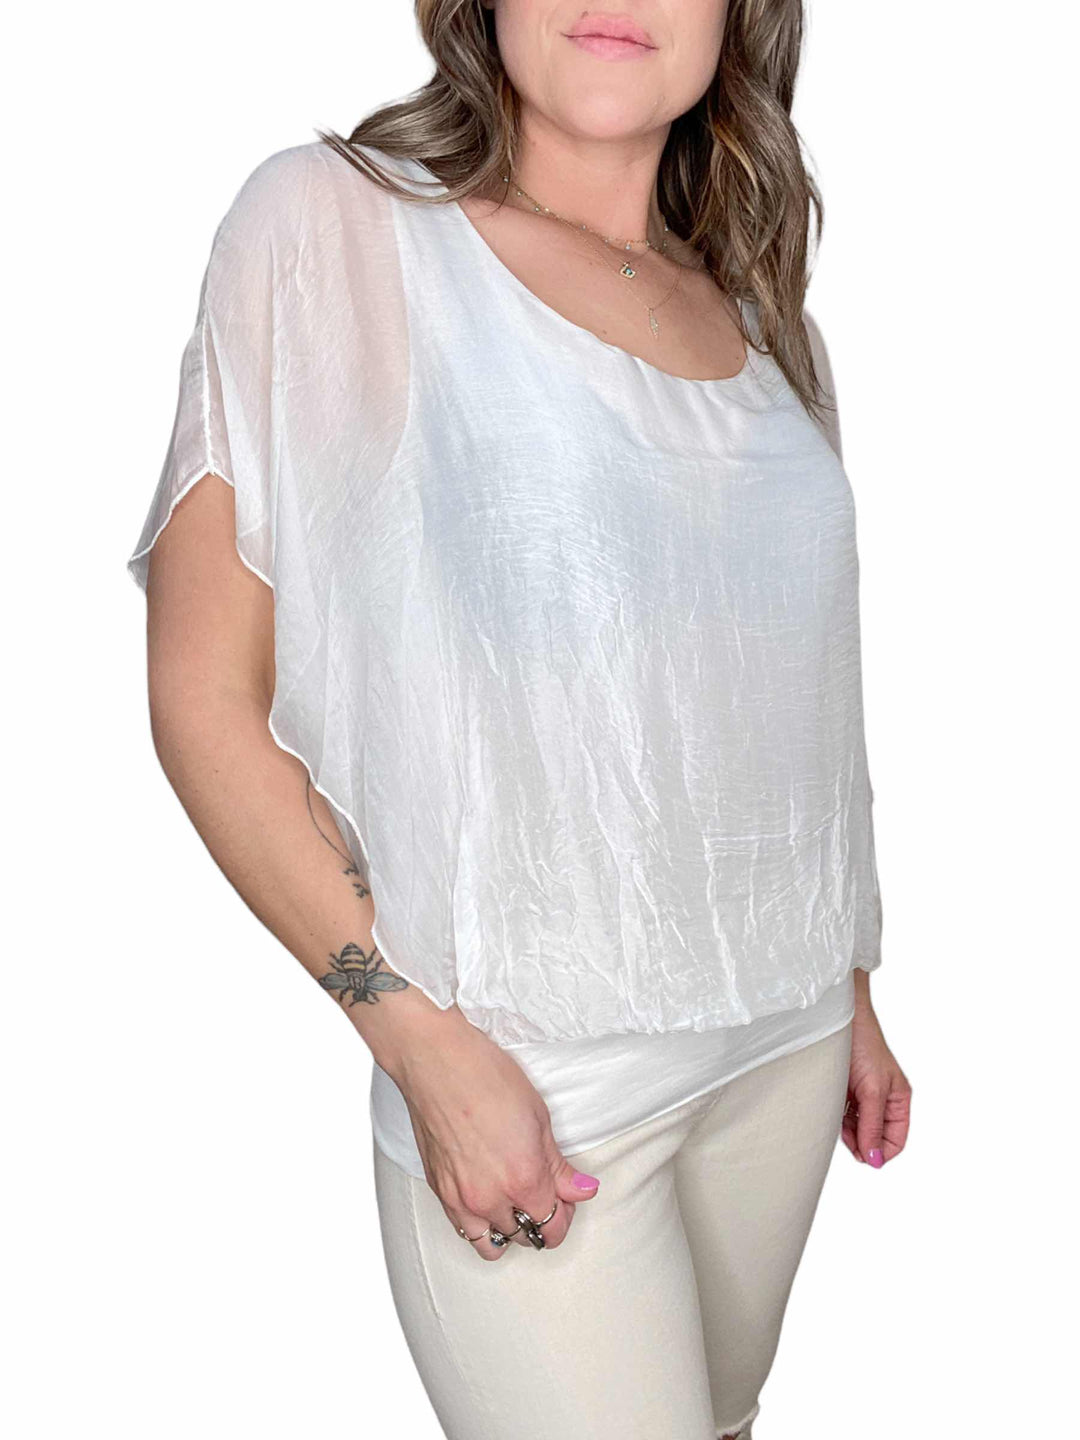 SILK BANDED SHORT SLEEVE TOP - WHITE - Kingfisher Road - Online Boutique